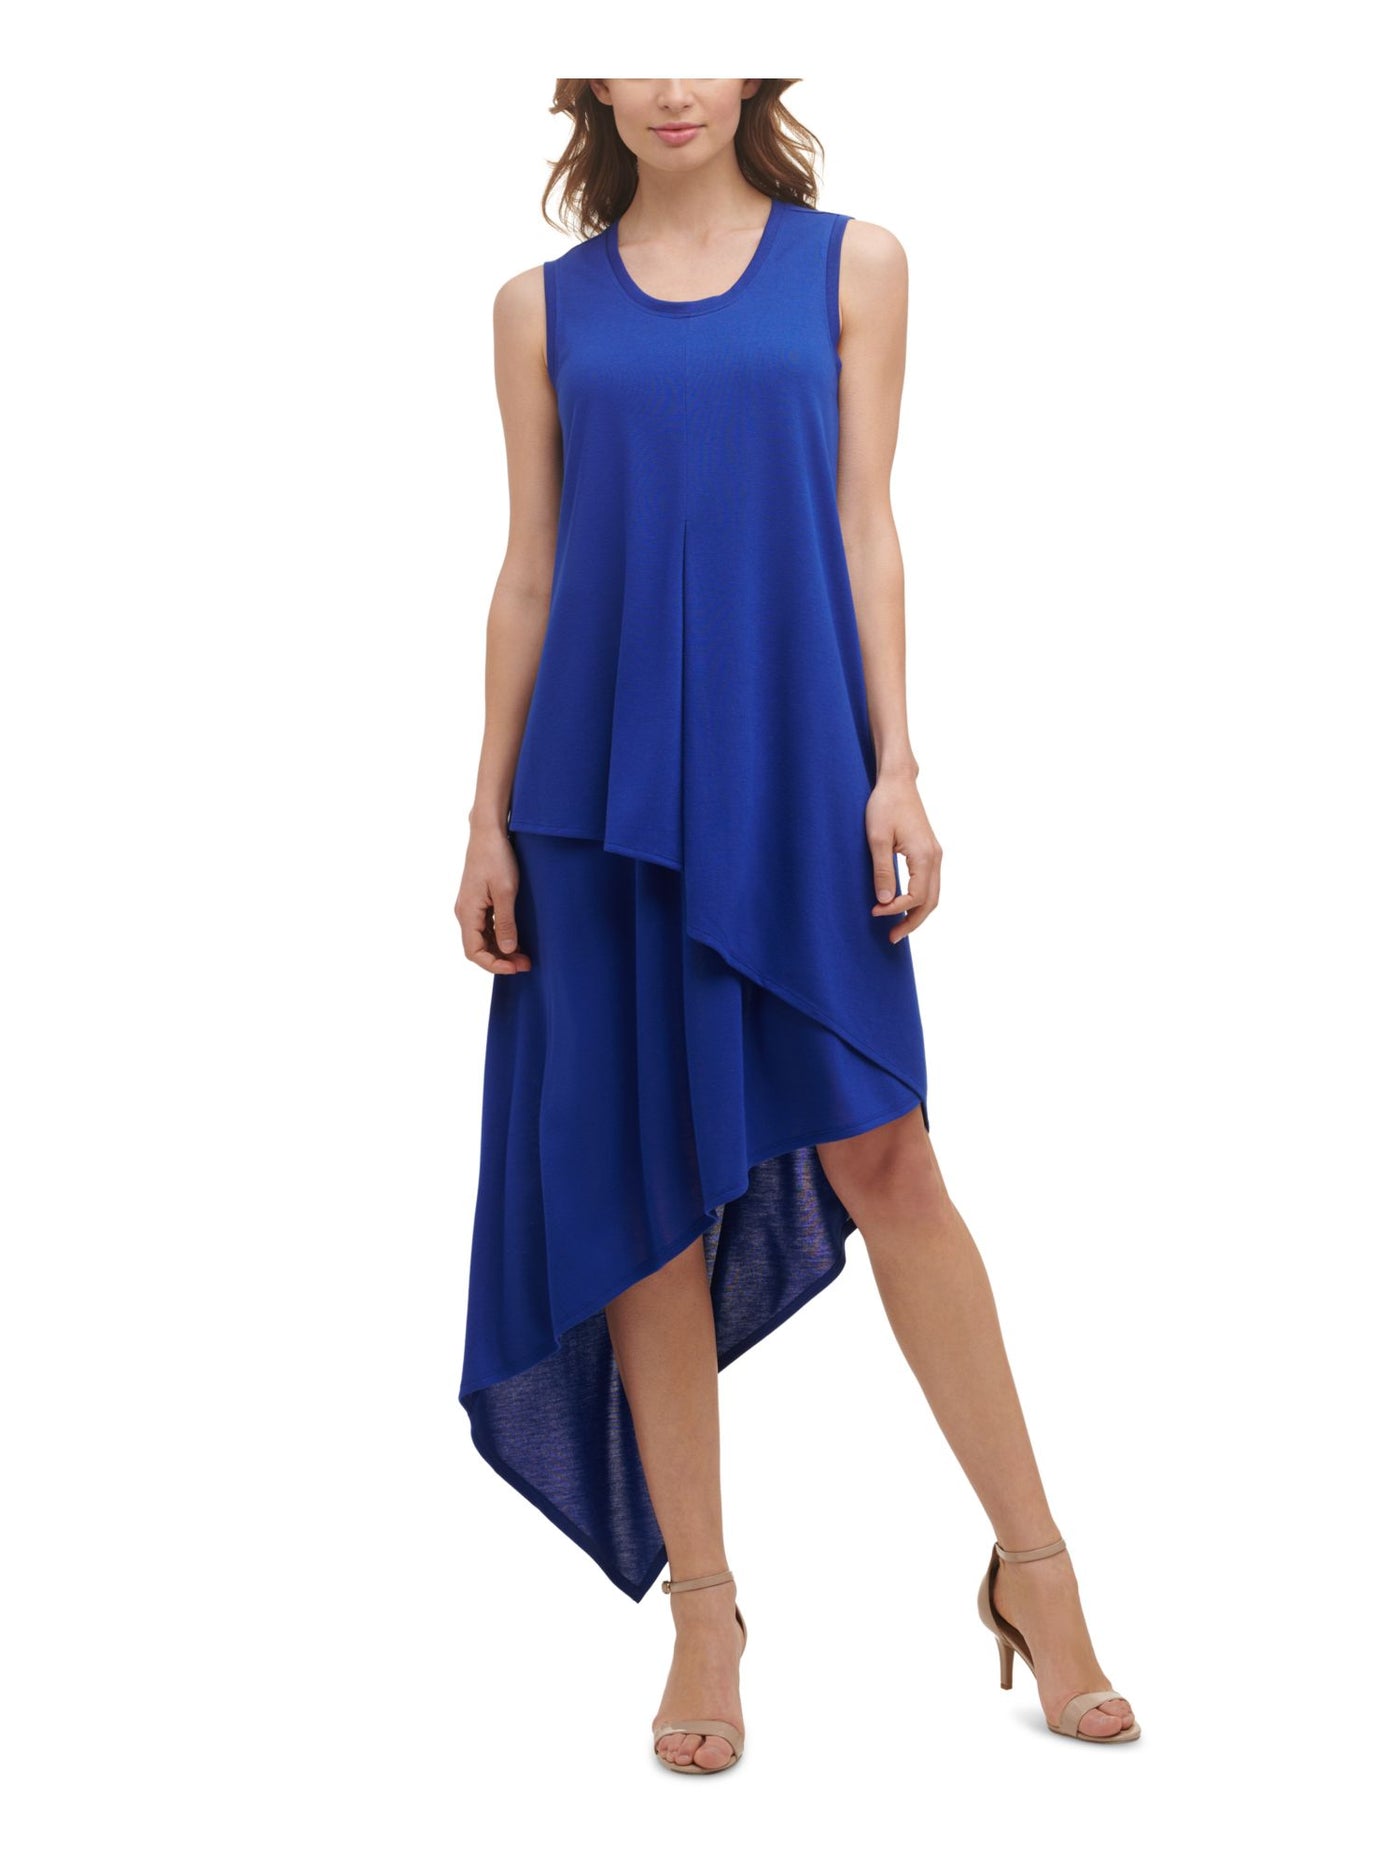 KENSIE Womens Blue Jersey Pleated Pullover Styling Unlined Sleeveless Jewel Neck Maxi Evening Hi-Lo Dress XS